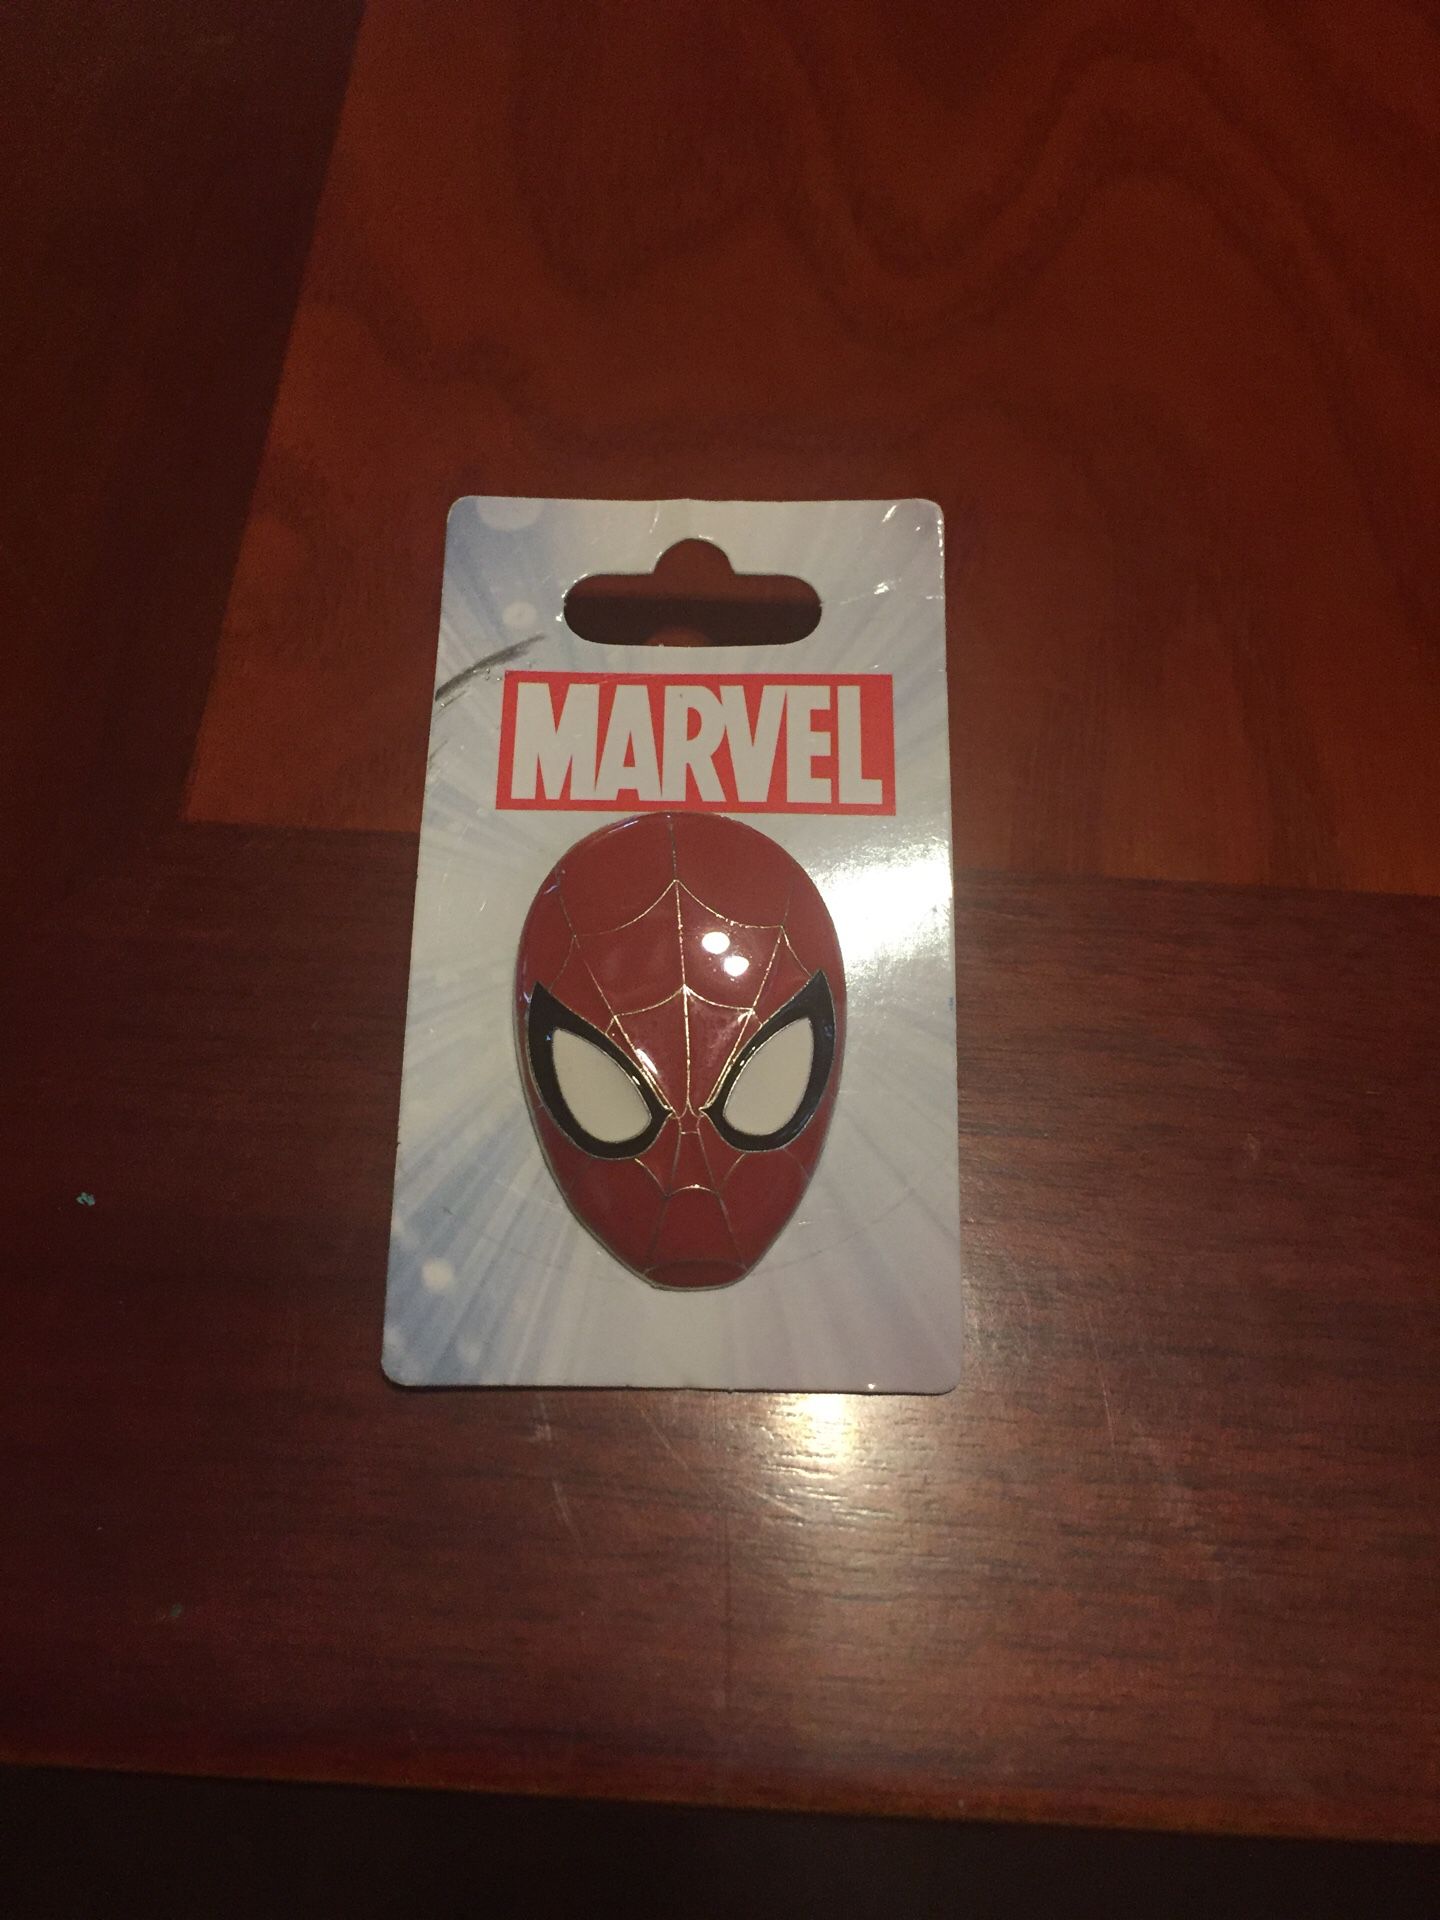 Brand new marvel Spiderman head pin from Disney world. One and a half inches tall